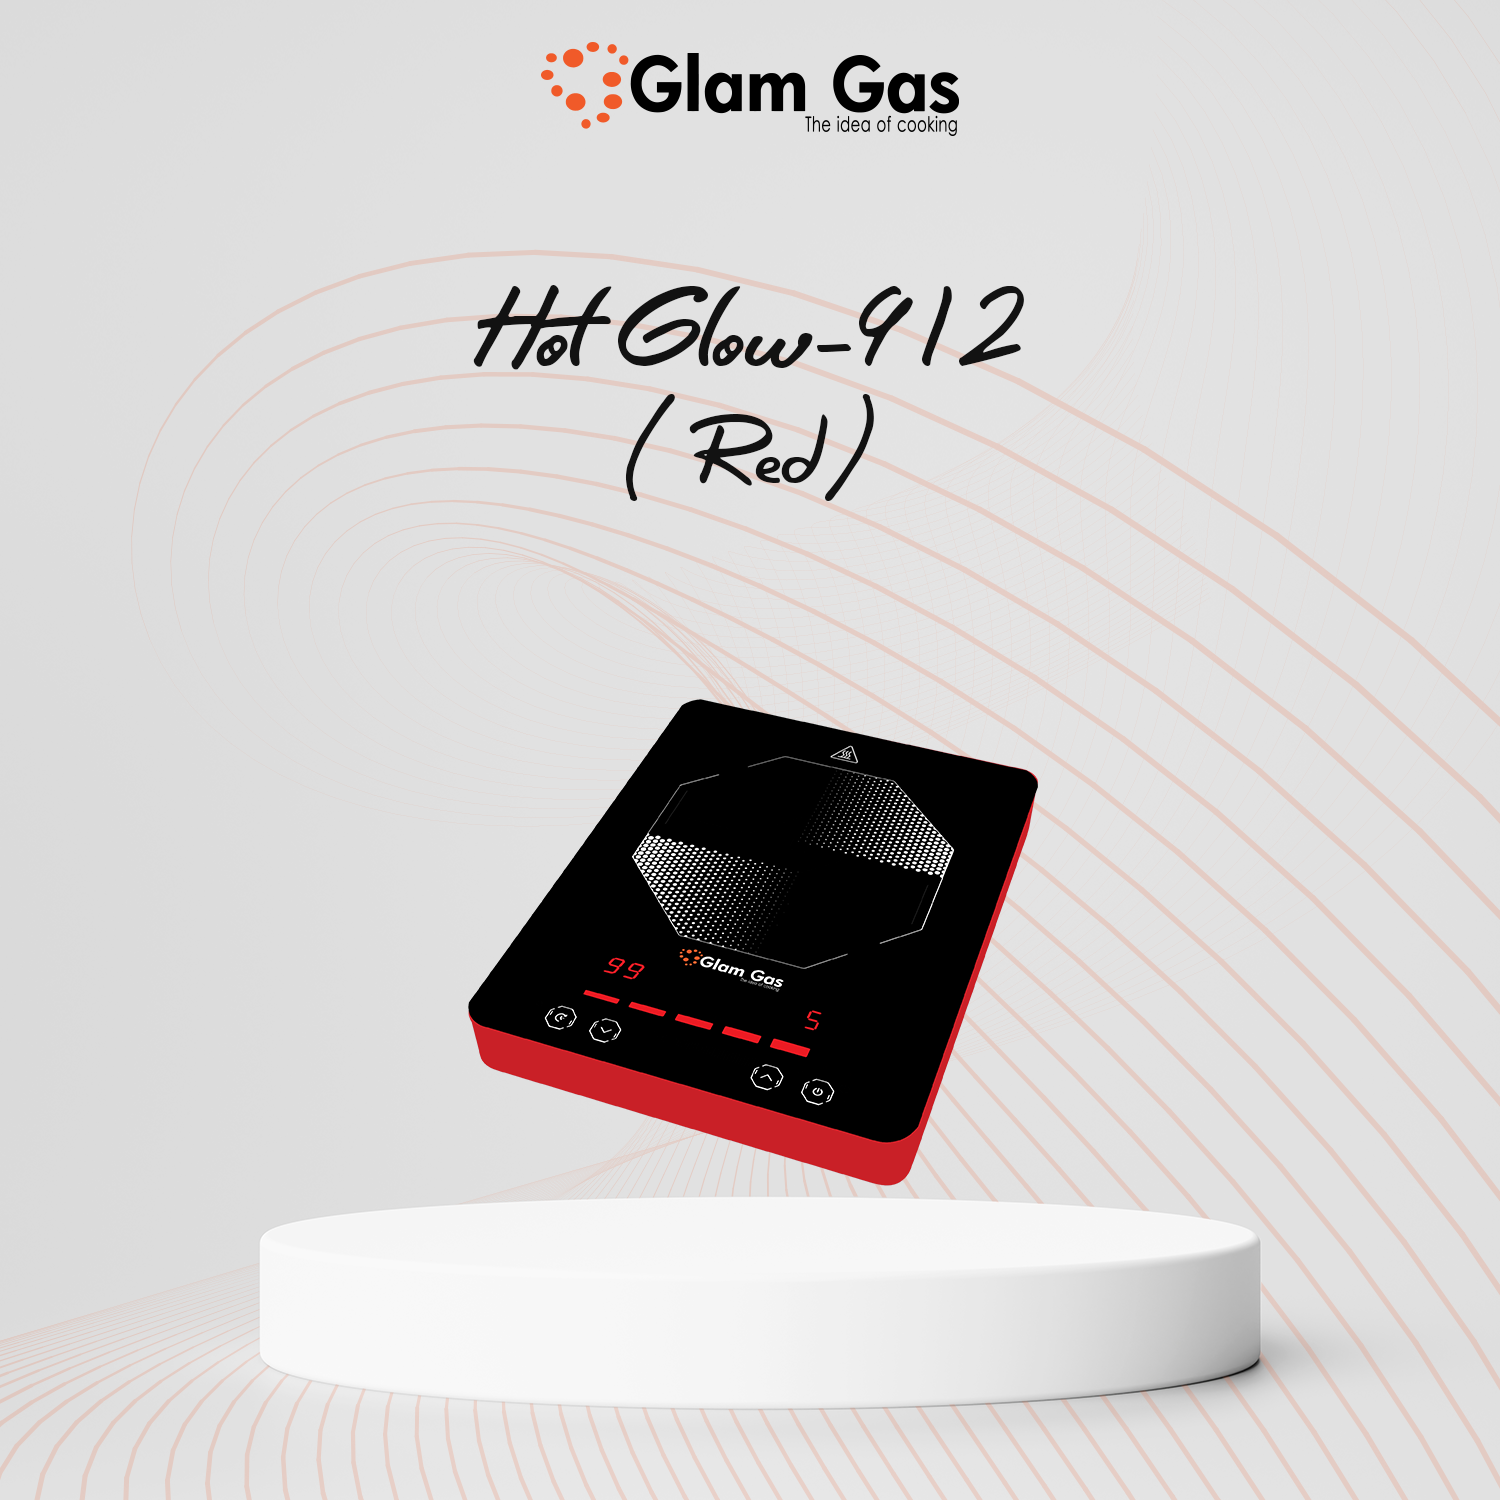 Hot Glow-912 (Red)